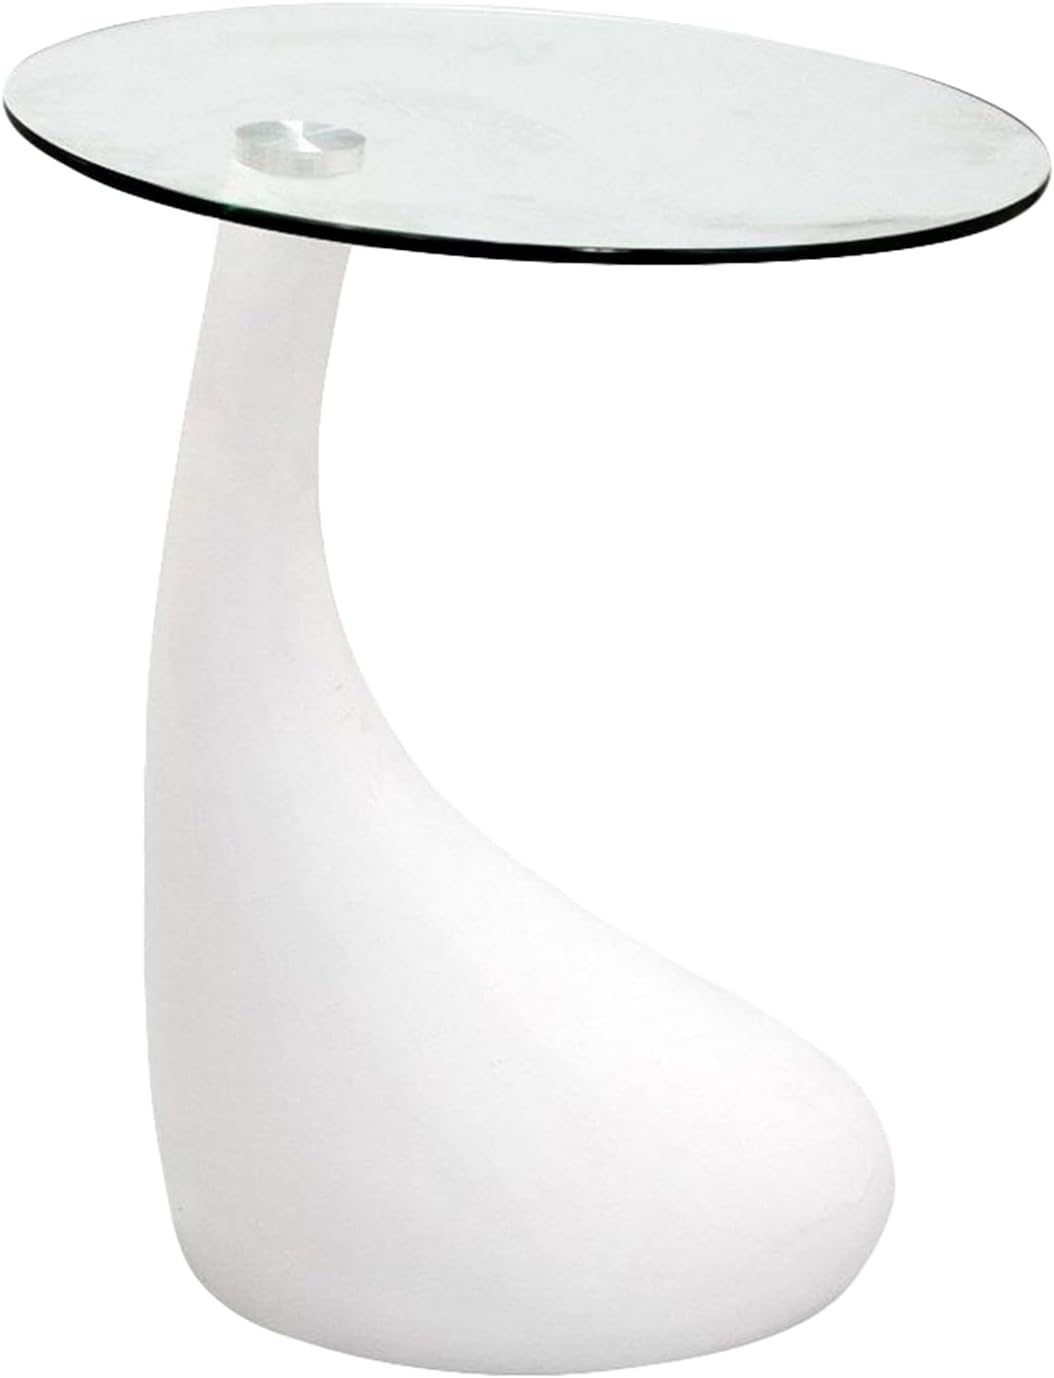 Fab Glass and Mirror Modern White Round Top for Living Room,Offices, Bed Side Glass End Table with High Gloss Base, 18